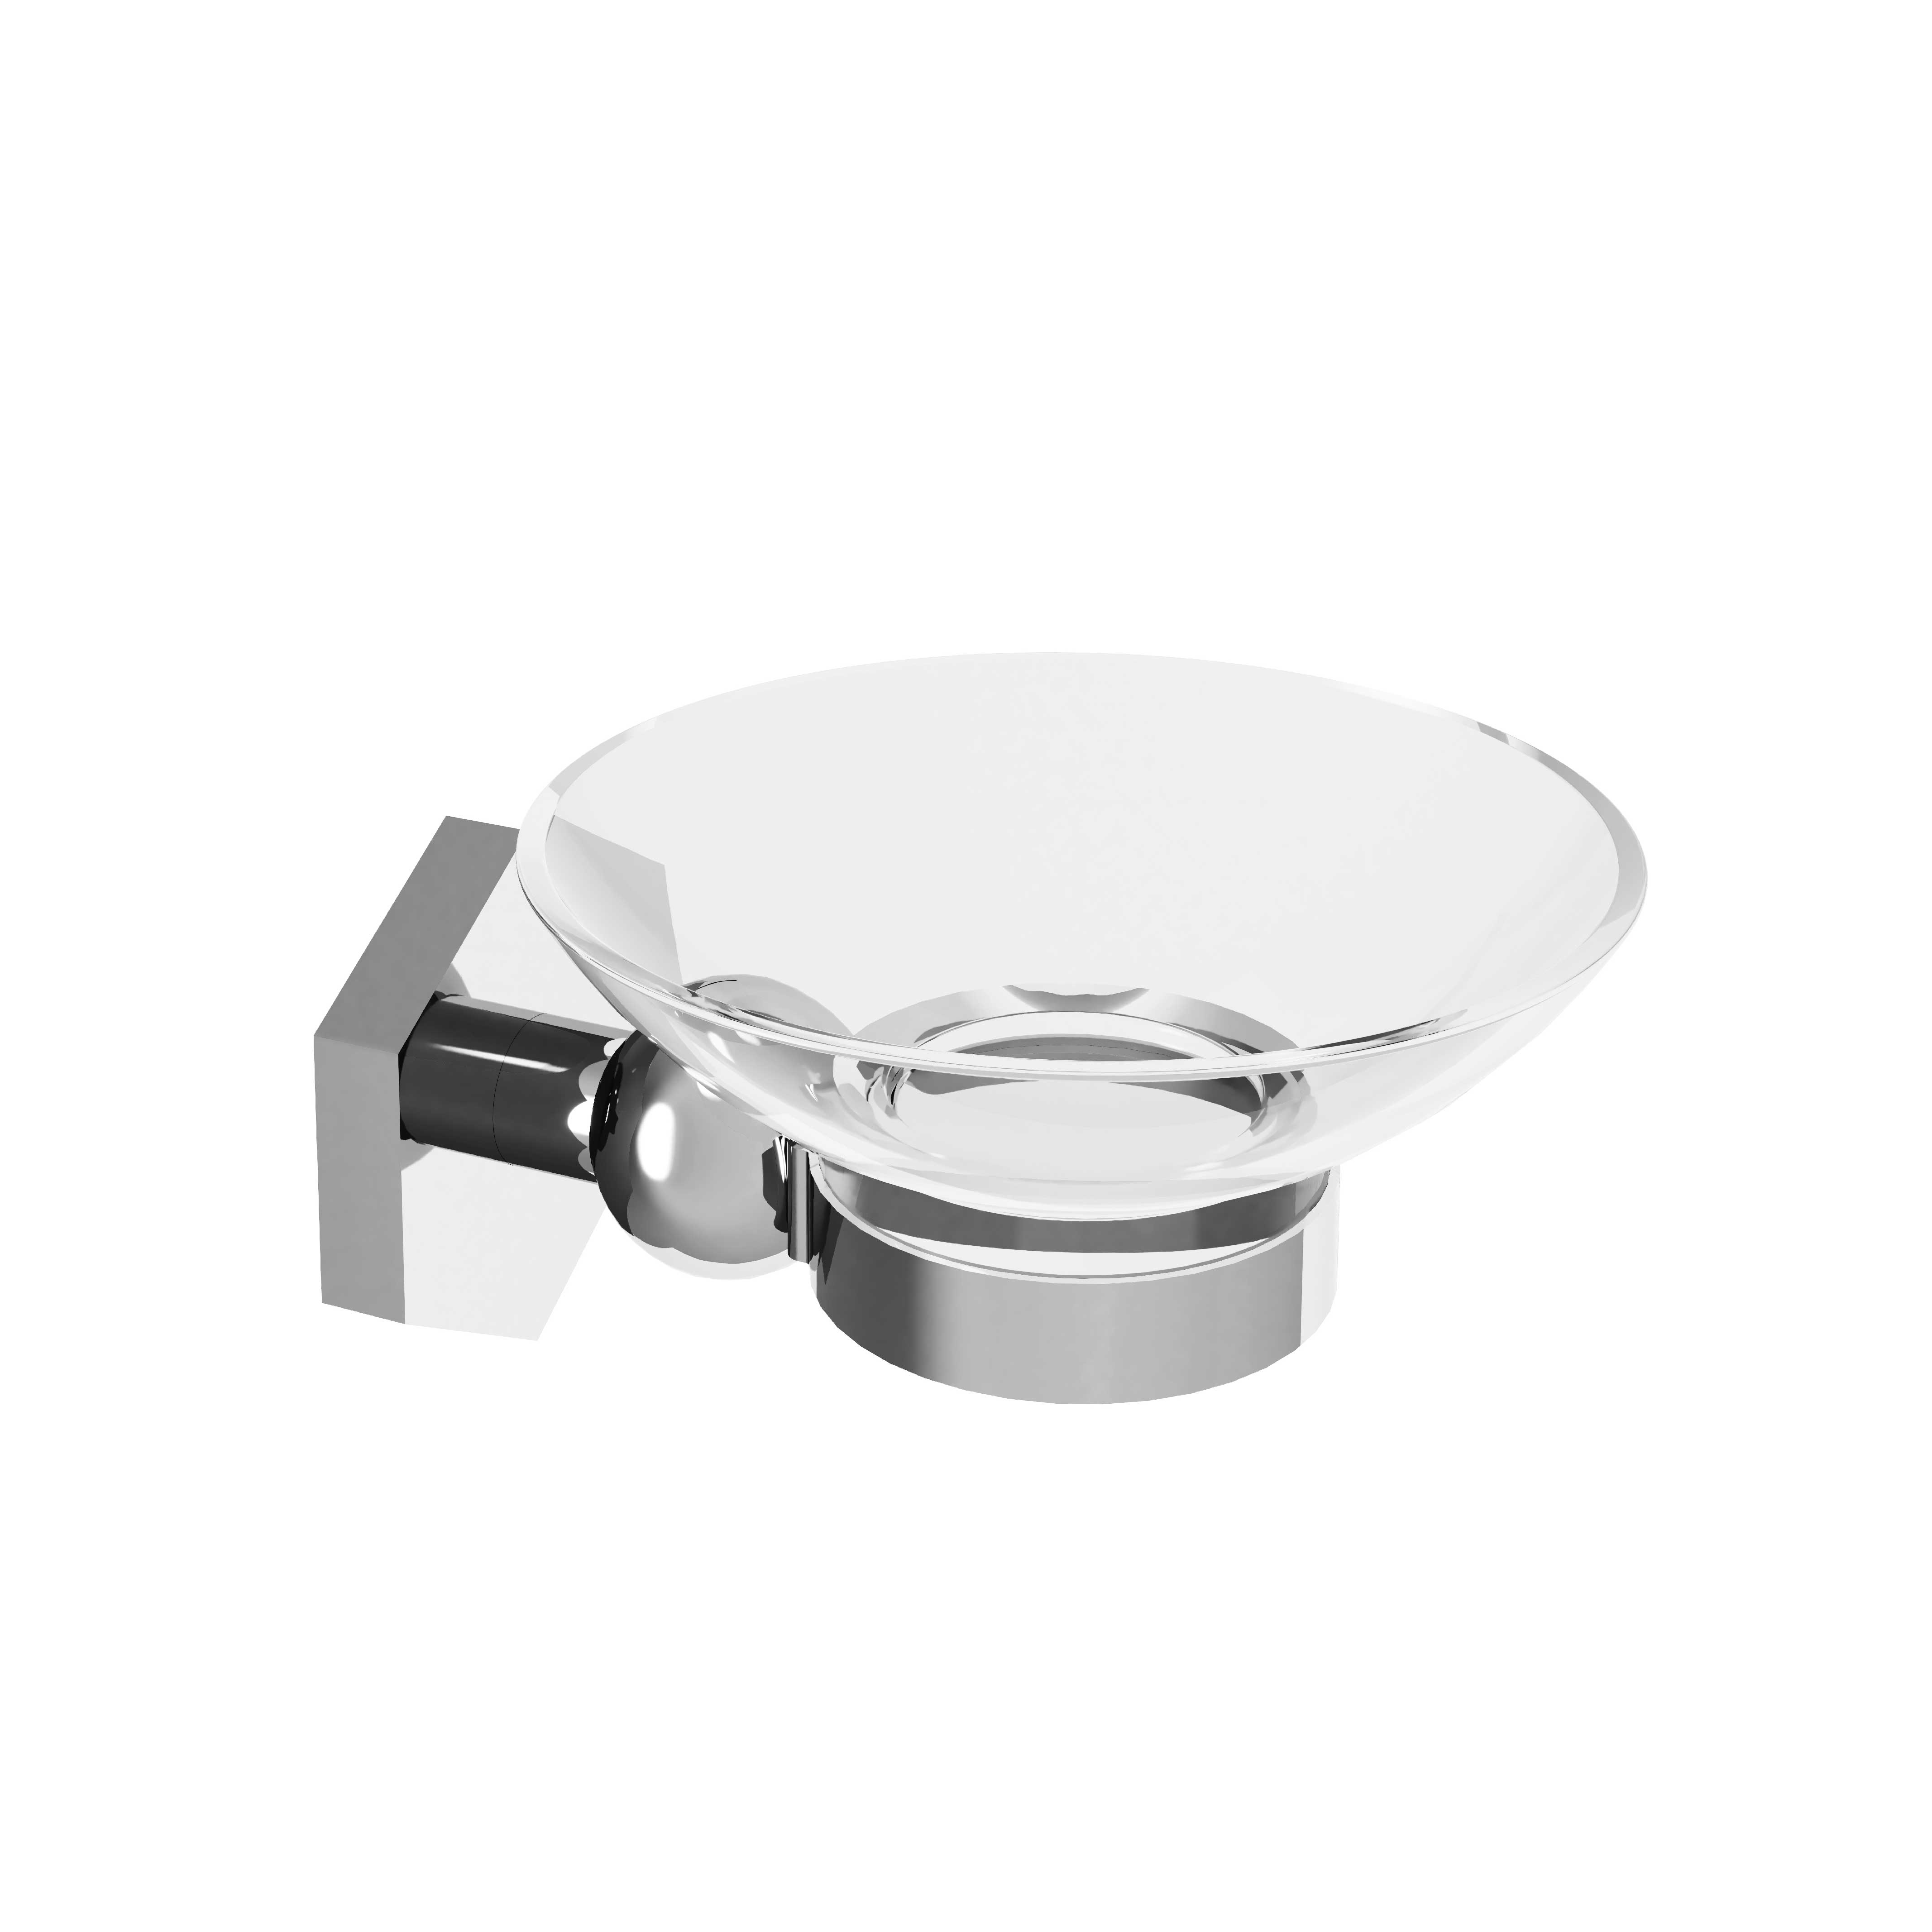 M30-515 Wall mounted soap dish holder